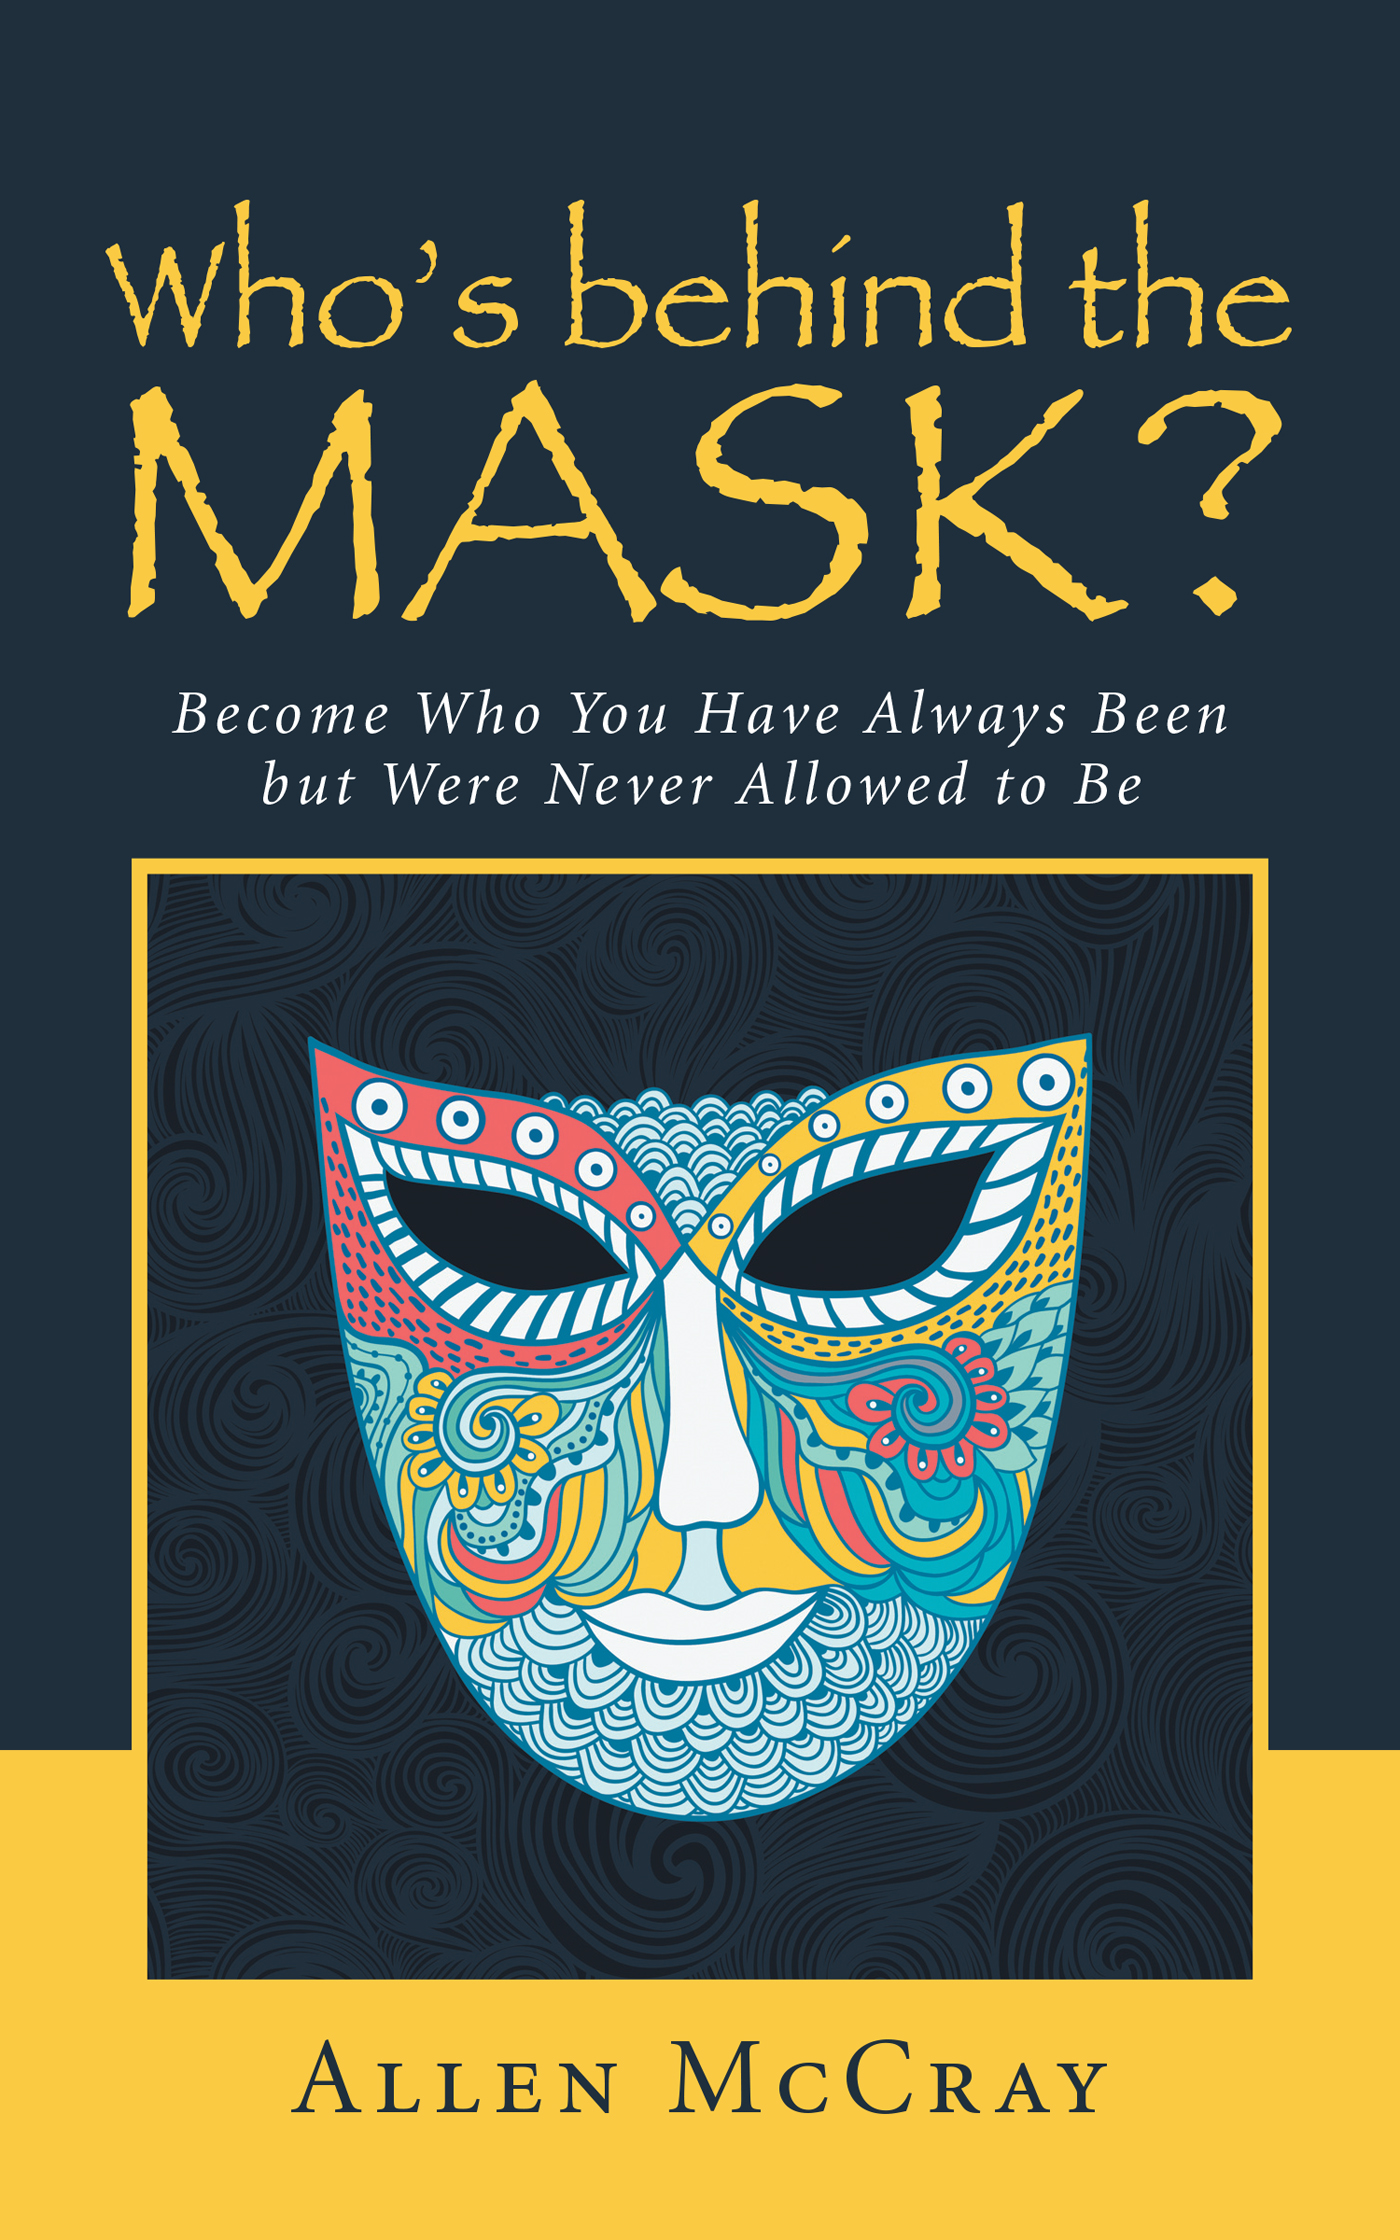 New Book, "Who's Behind the Mask?", by Allen McCray, Guides Readers to